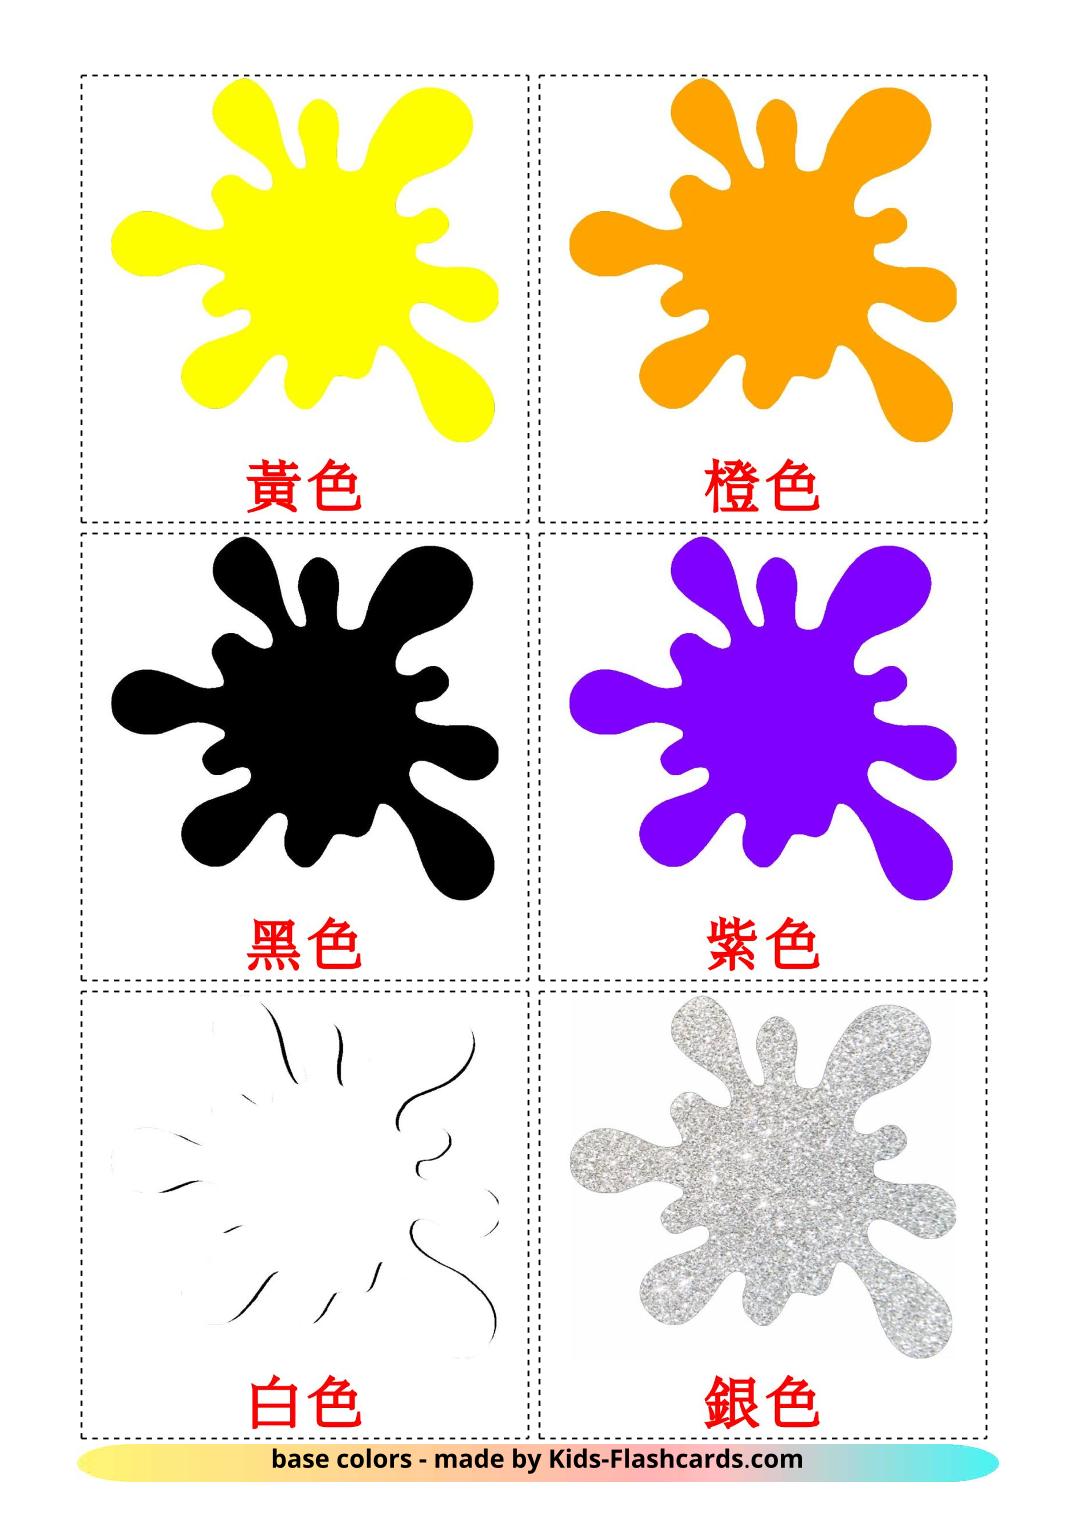 Base colors - 12 Free Printable chinese(Traditional) Flashcards 